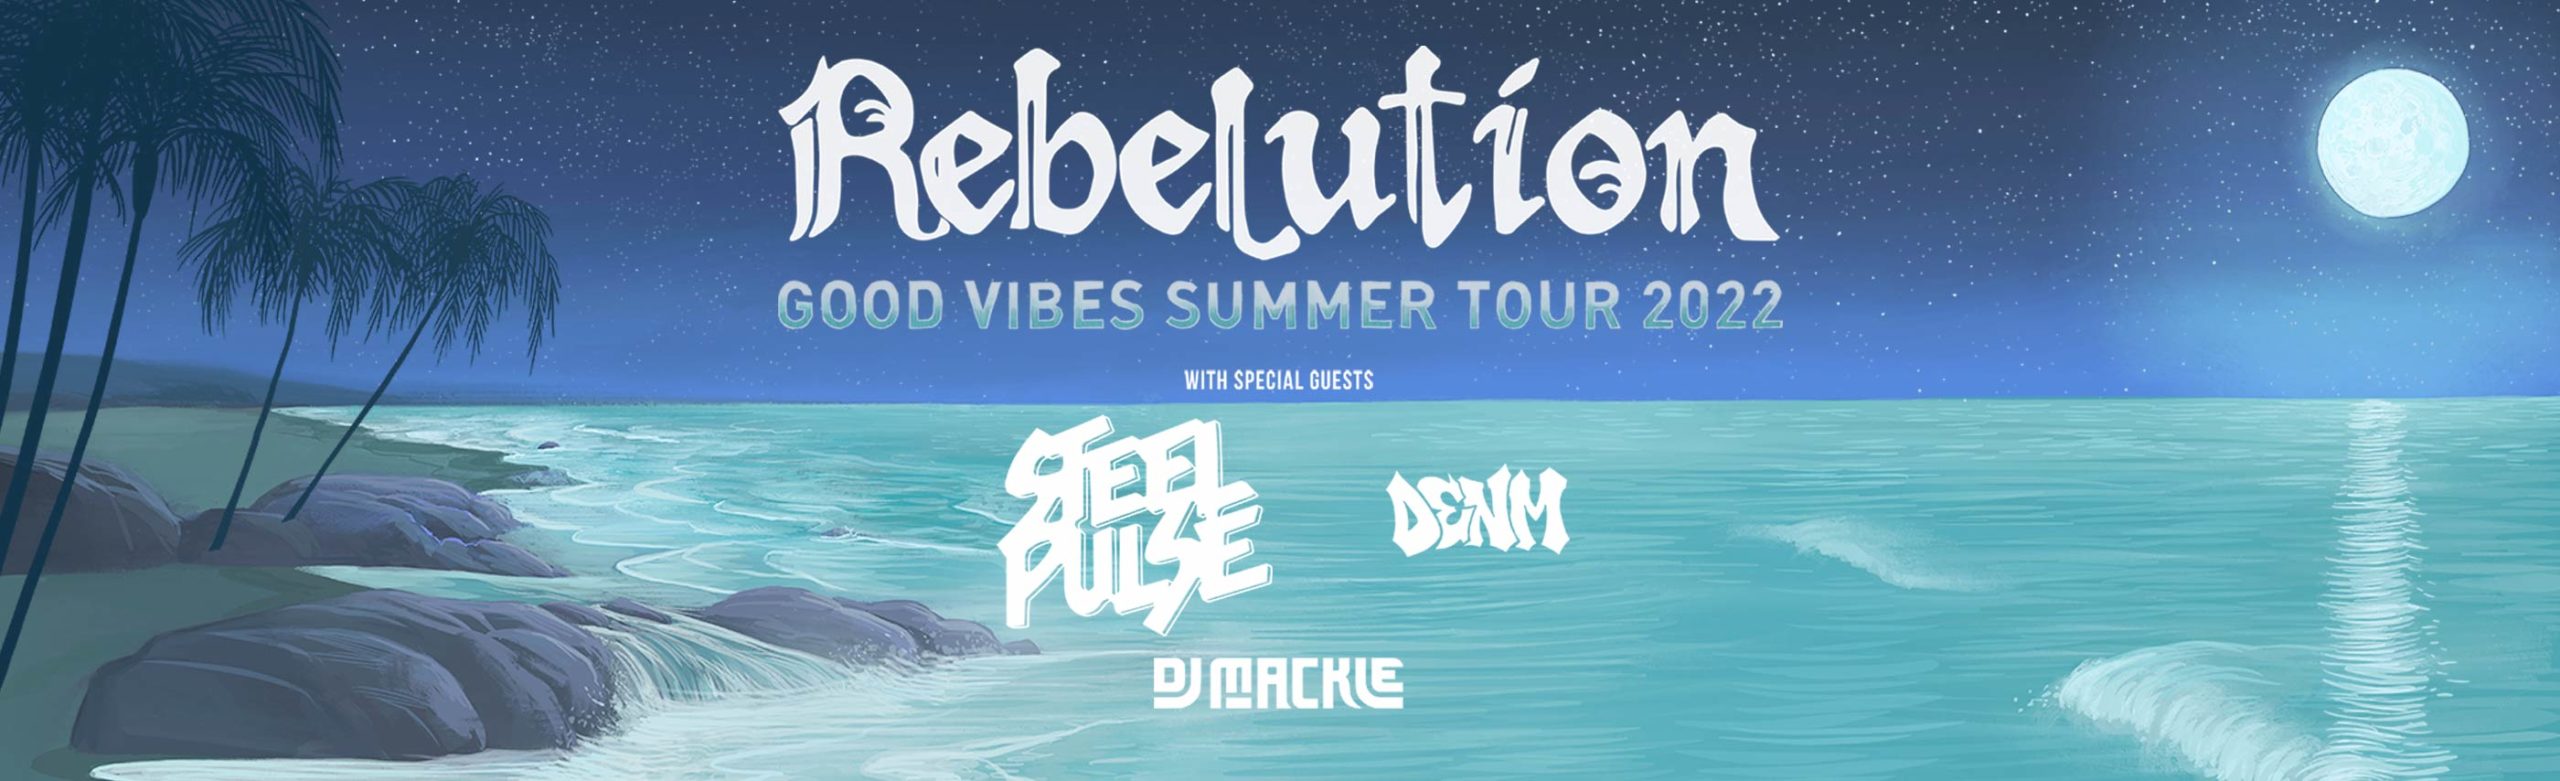 Reggae on the Blackfoot River: Rebelution Will Return to Montana with Steel Pulse and DENM Image